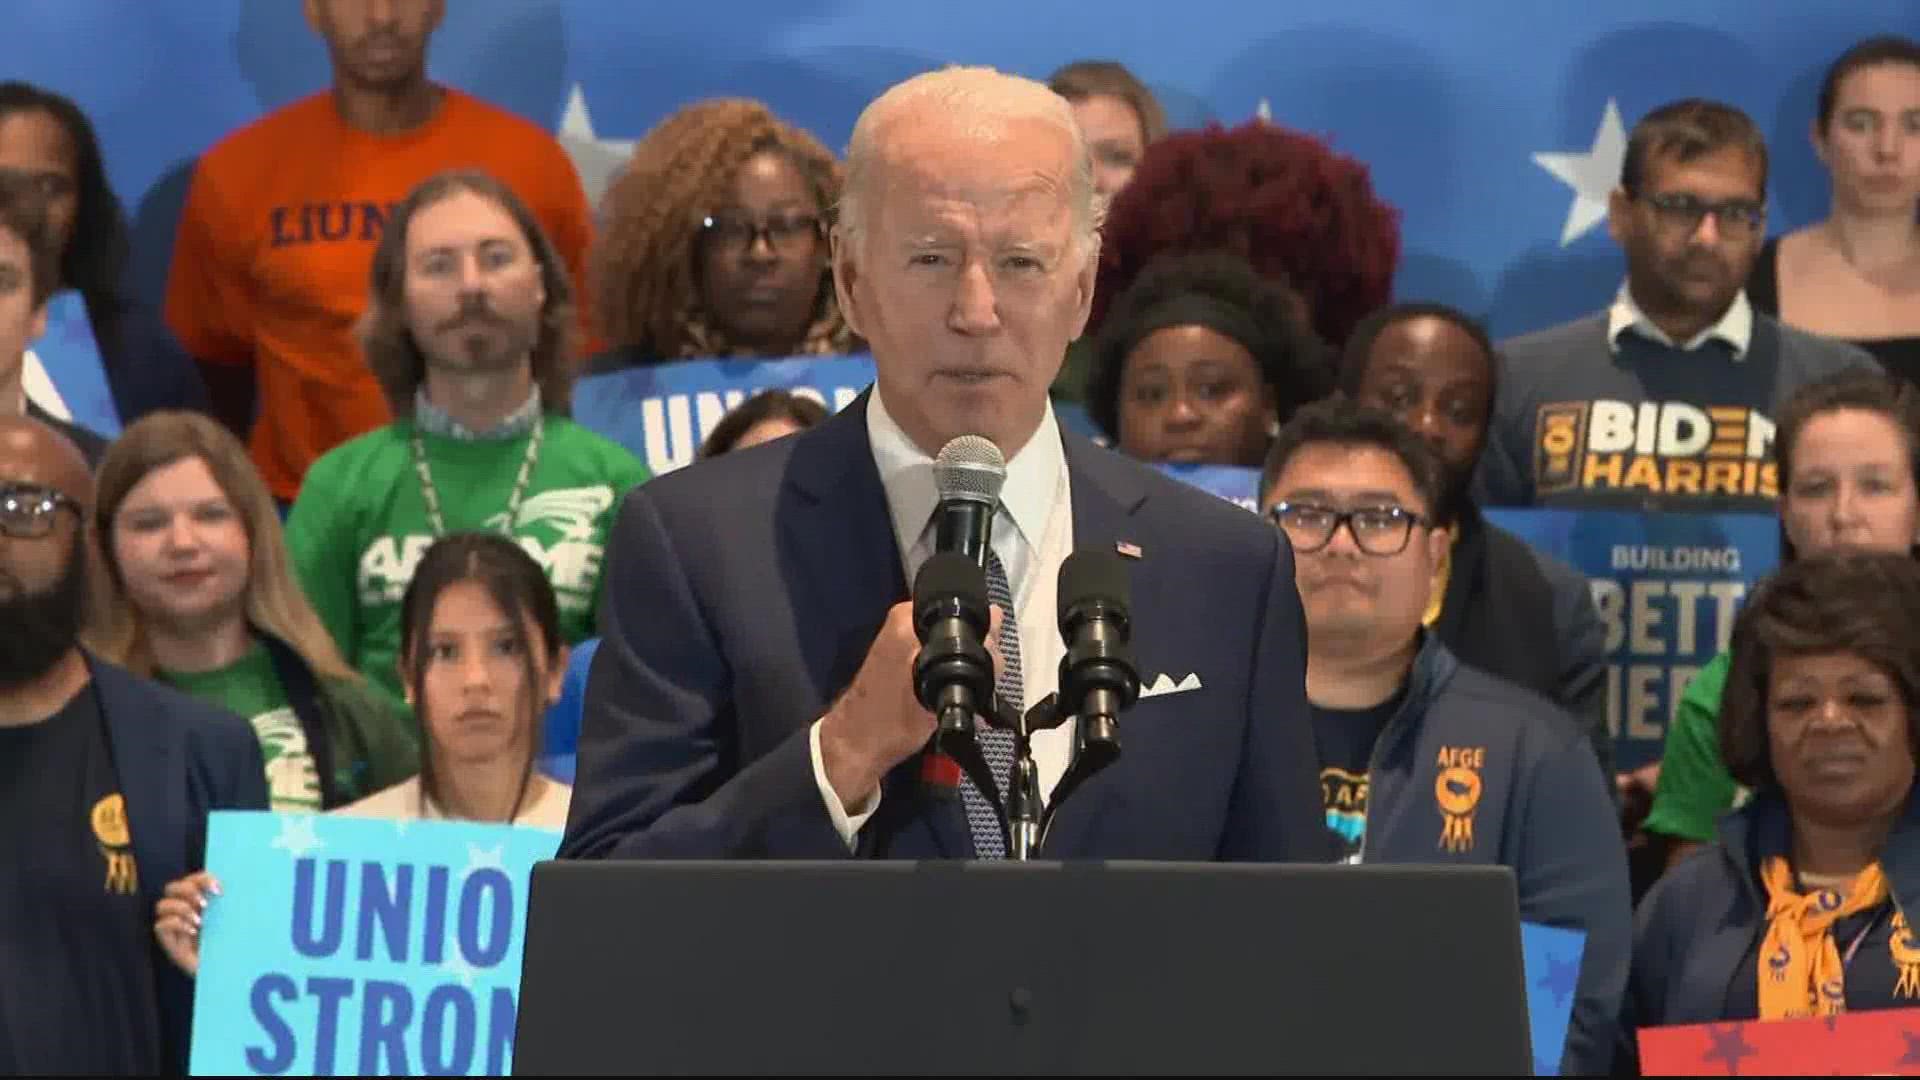 President Biden gave a speech to a crowd of DNC supporters at the National Education Association today